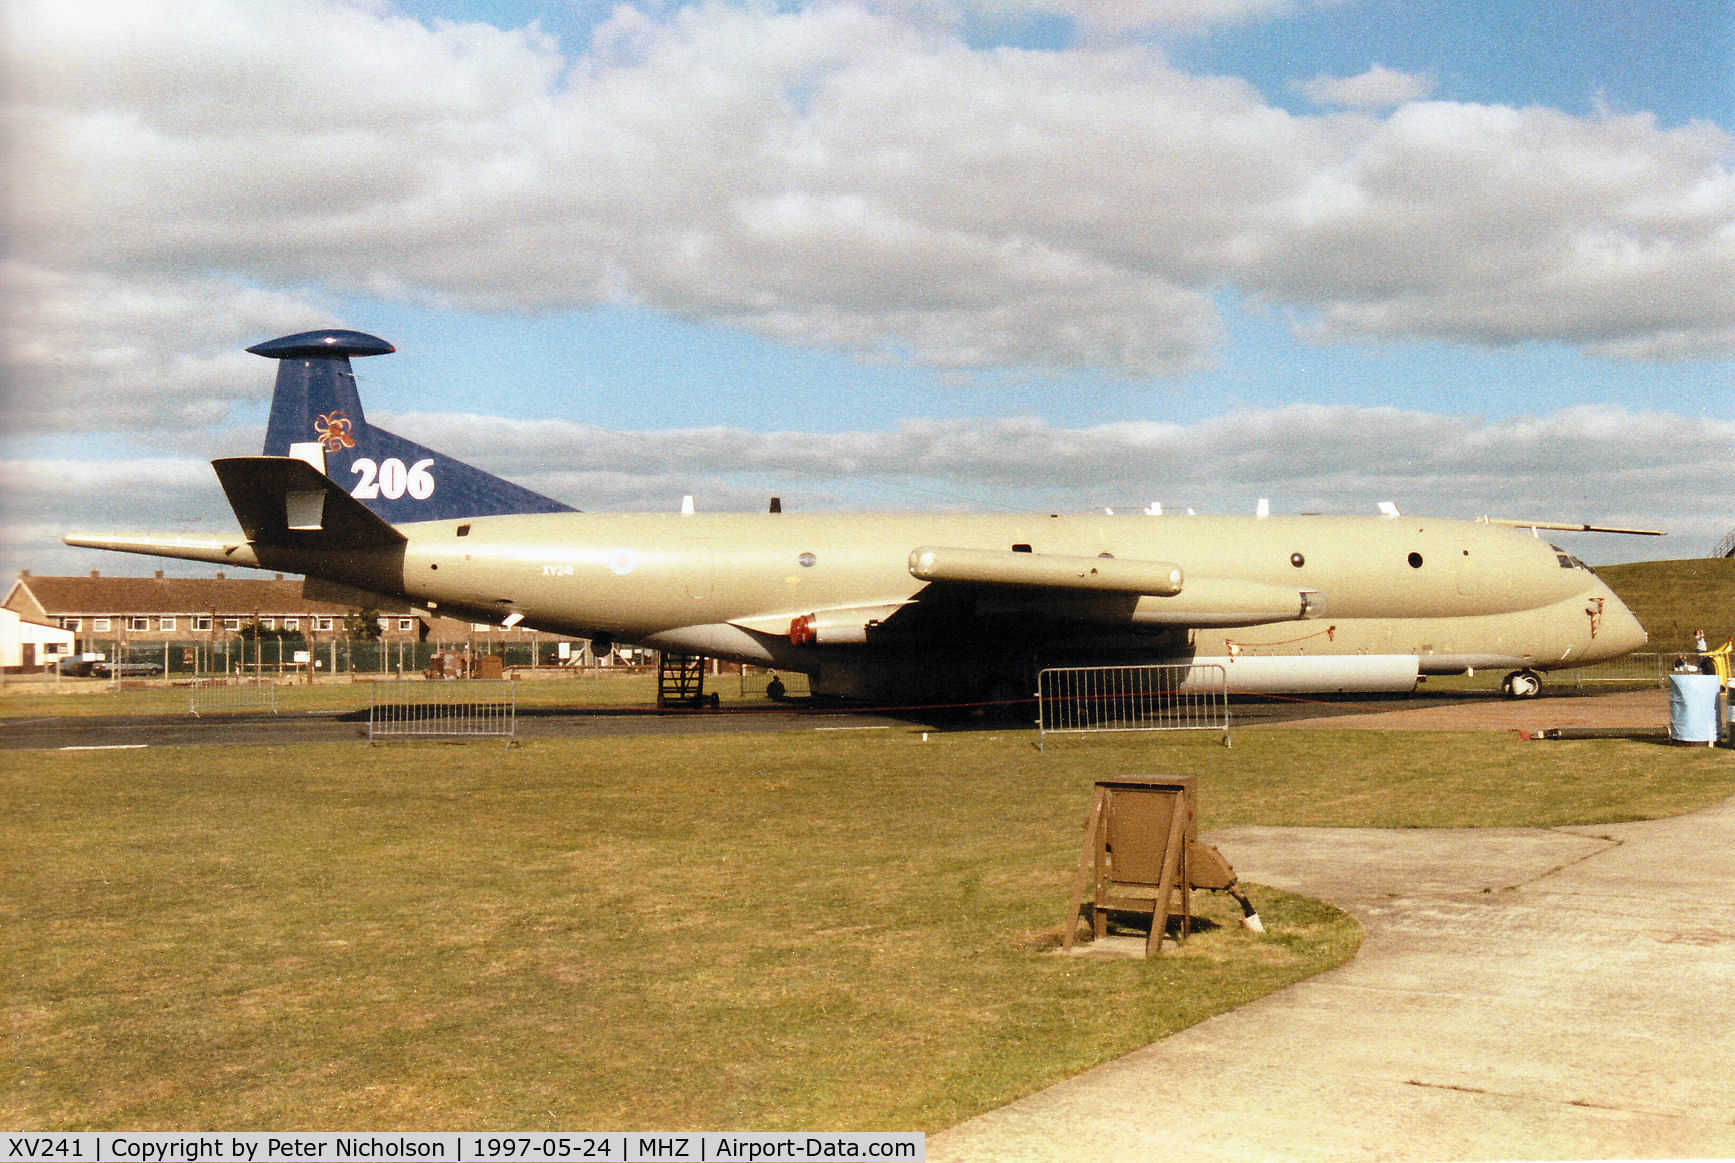 XV241, Hawker Siddeley Nimrod MR.2 C/N 8016, Nimrod MR.2 of 206 Squadron at RAF Kinloss, with 80th anniversary tail markings, on display at the 1997 RAF Mildenhall Air Fete.